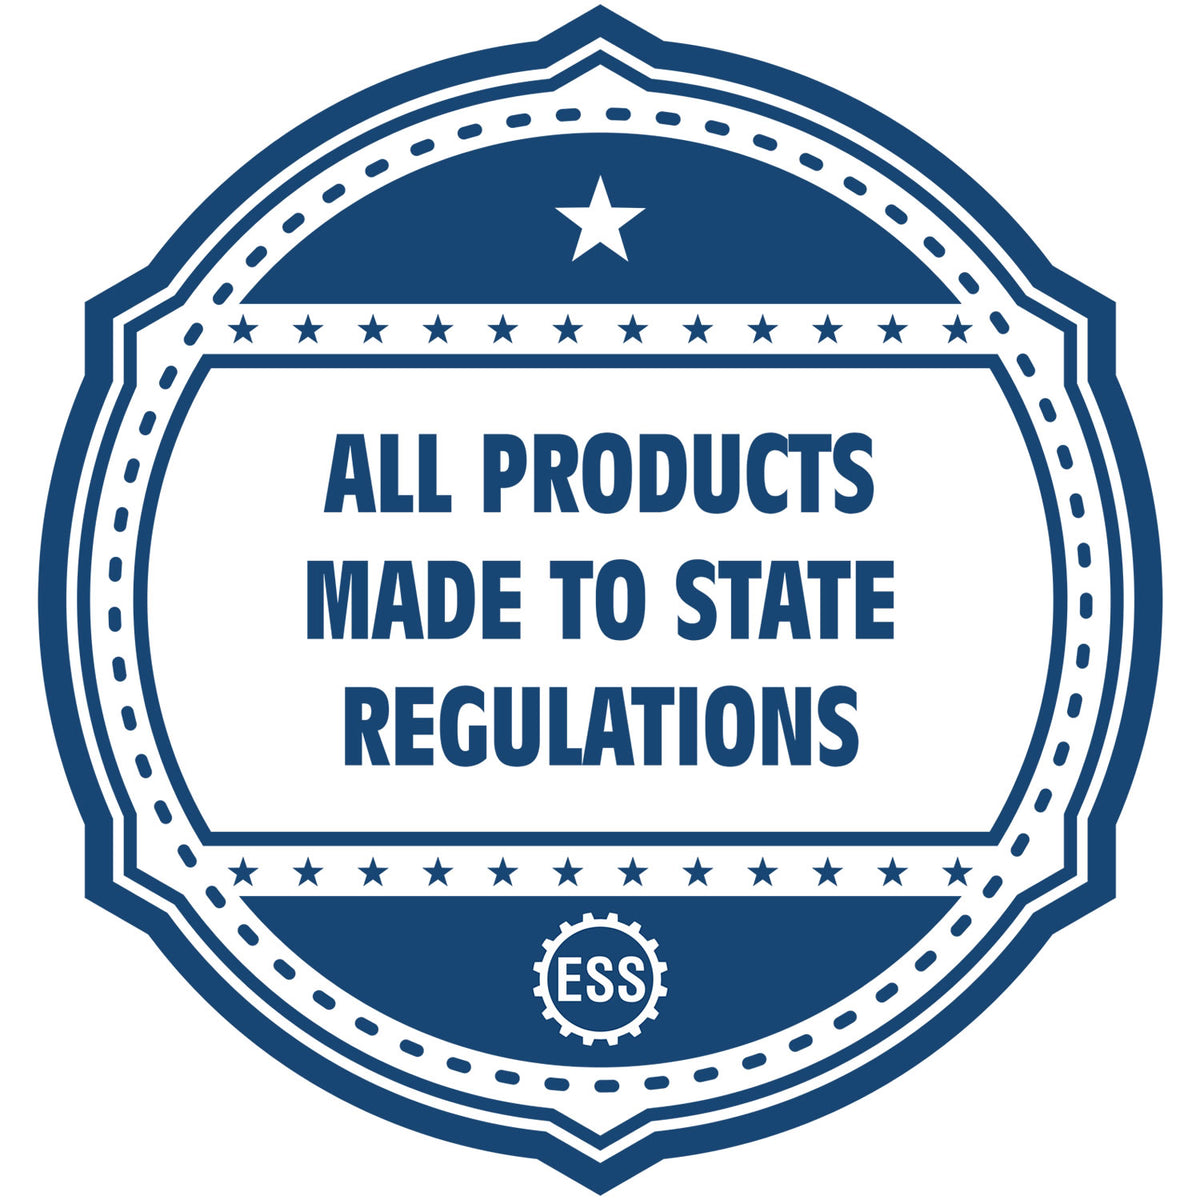 An icon or badge element for the South Dakota Landscape Architectural Seal Stamp showing that this product is made in compliance with state regulations.